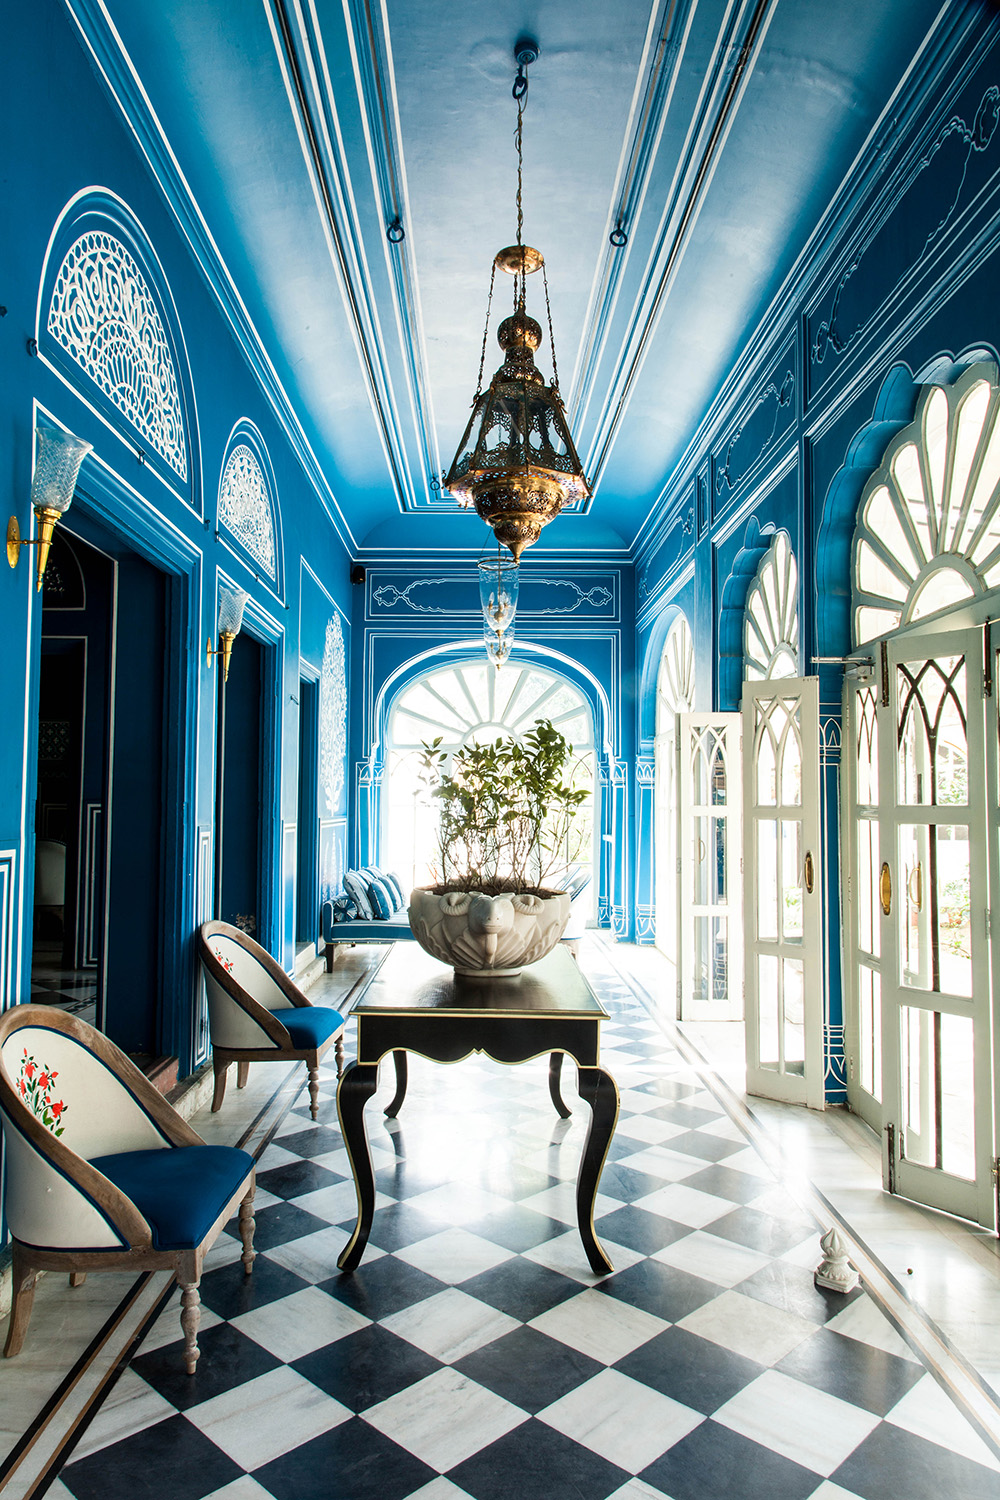 East meets west in spectacular style at Bar Palladio Jaipur to create a luxurious and out of this world orientalist fantasy, combine this with the best in Italian cuisine and you have a wonderful setting for a luxurious holiday retreat.